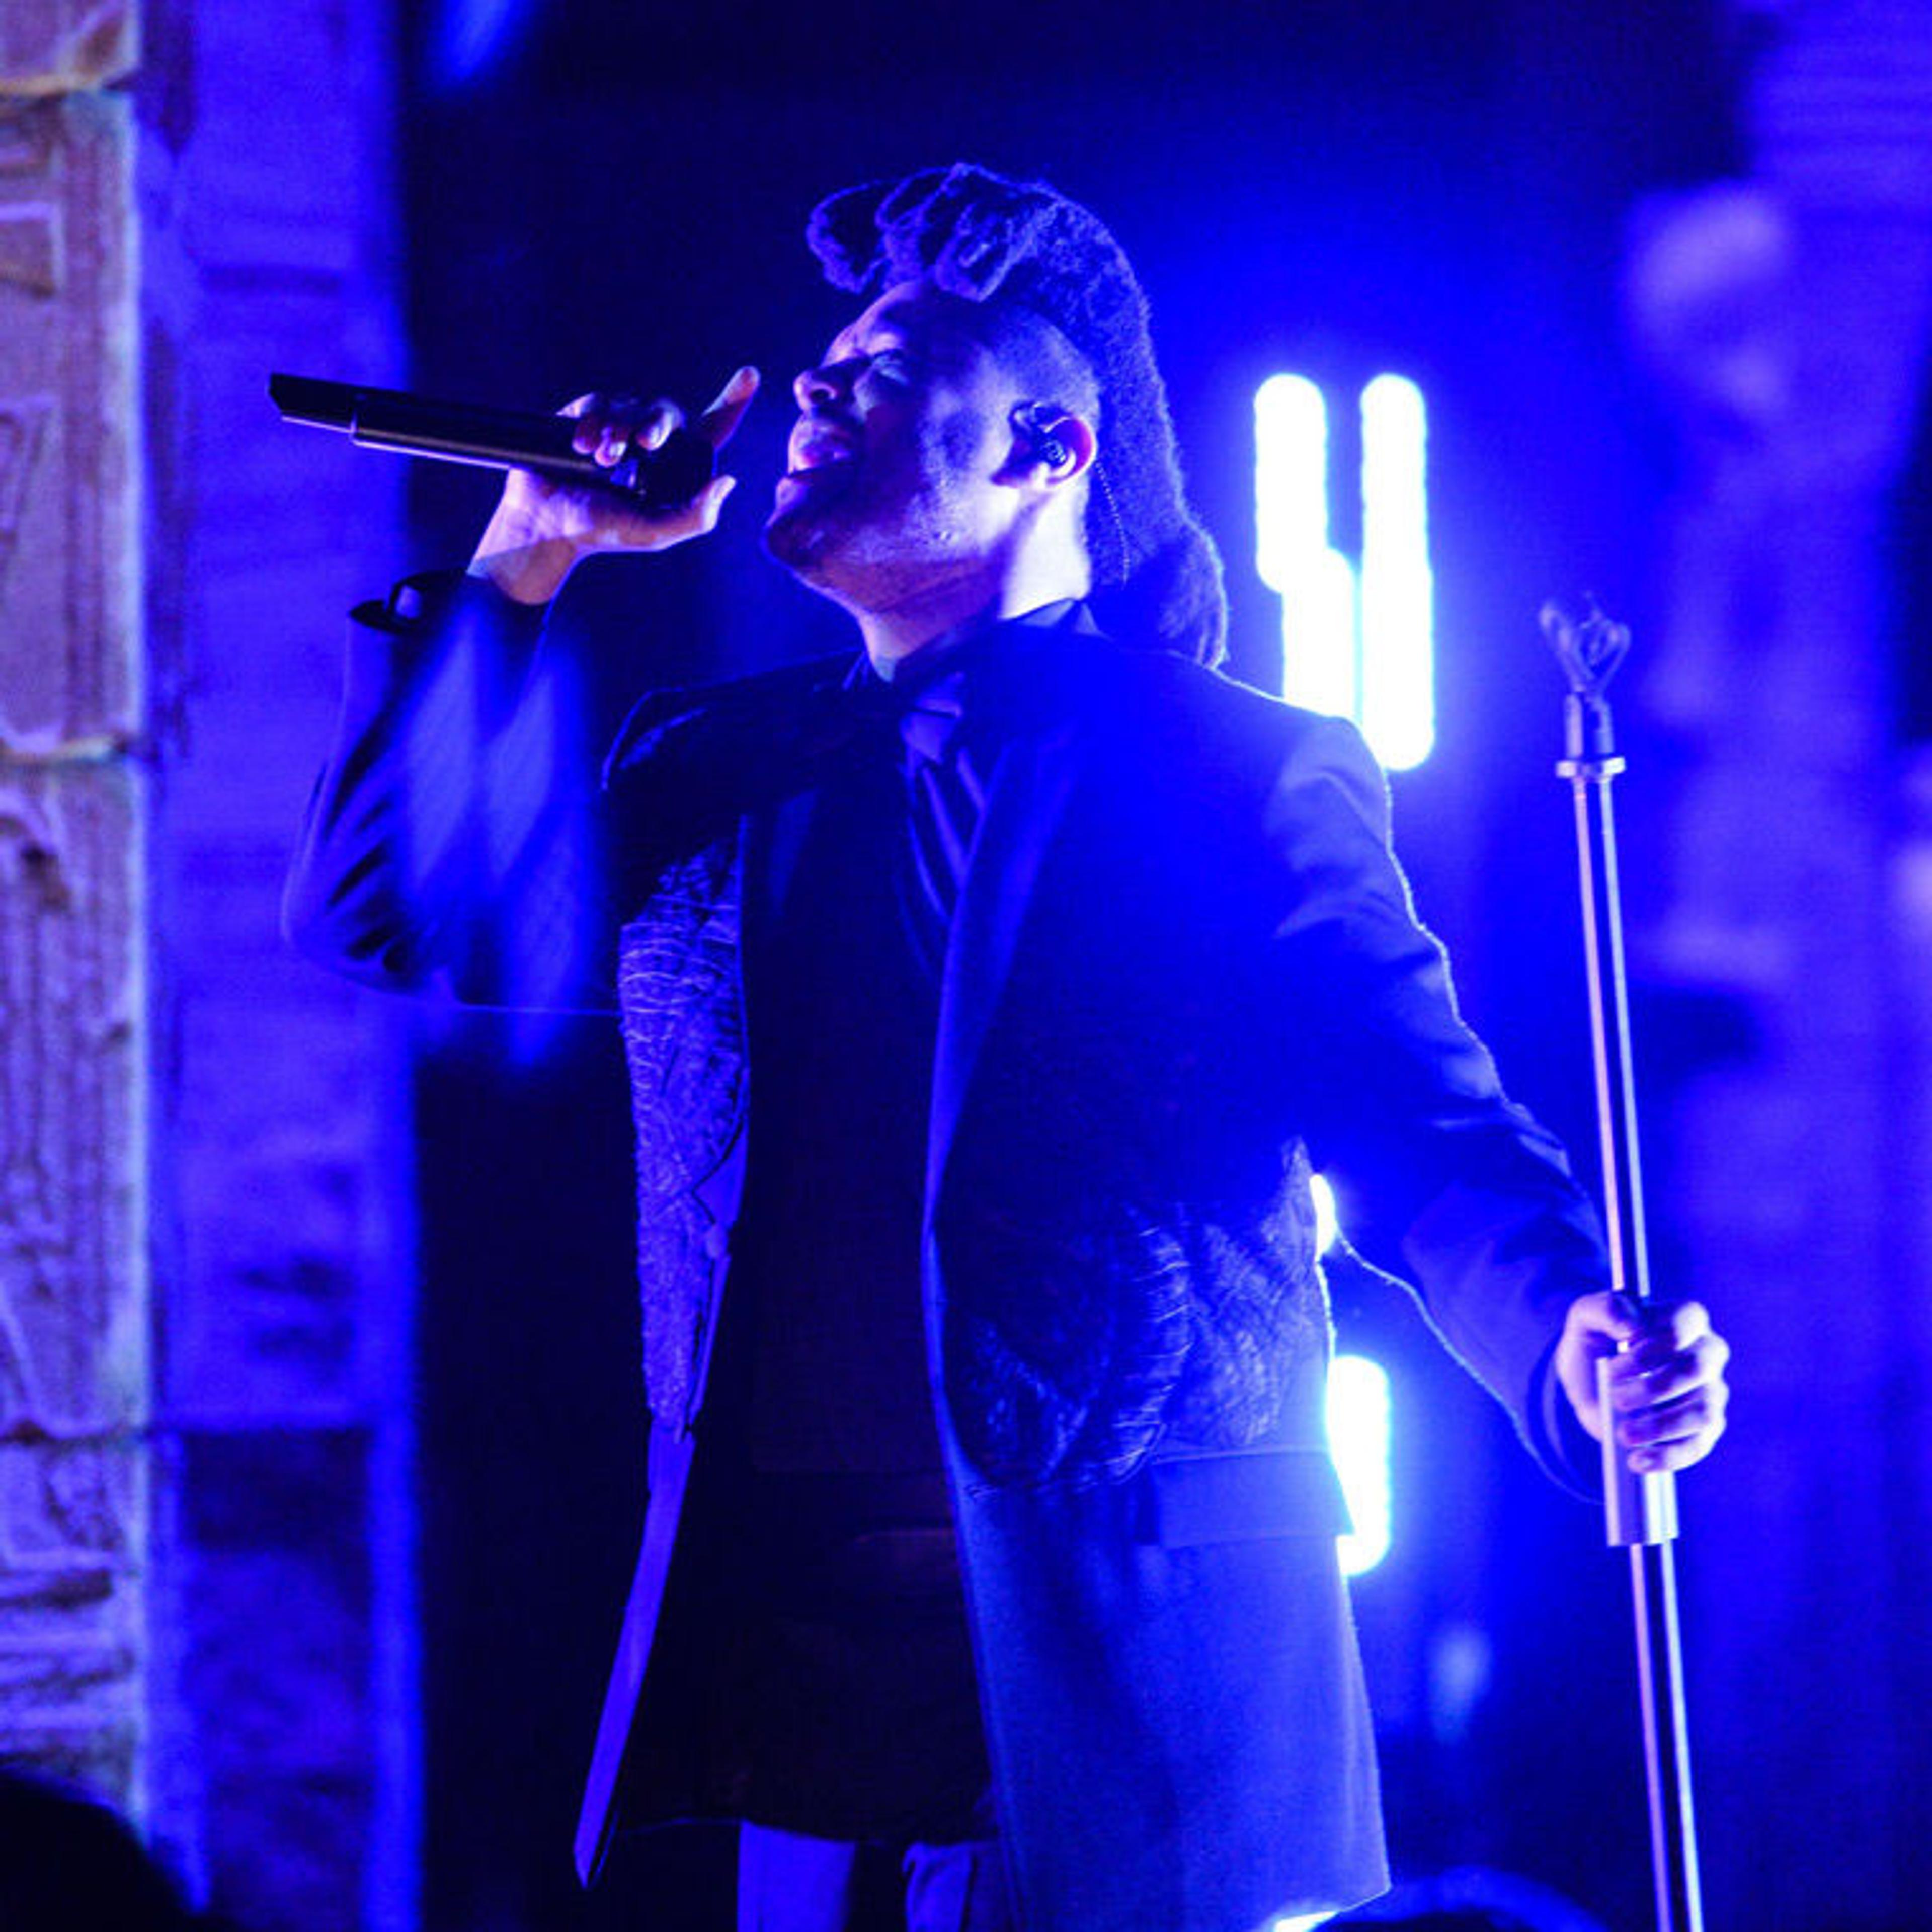 The Weeknd performs while bathed in blue light at the 2016 Met Gala